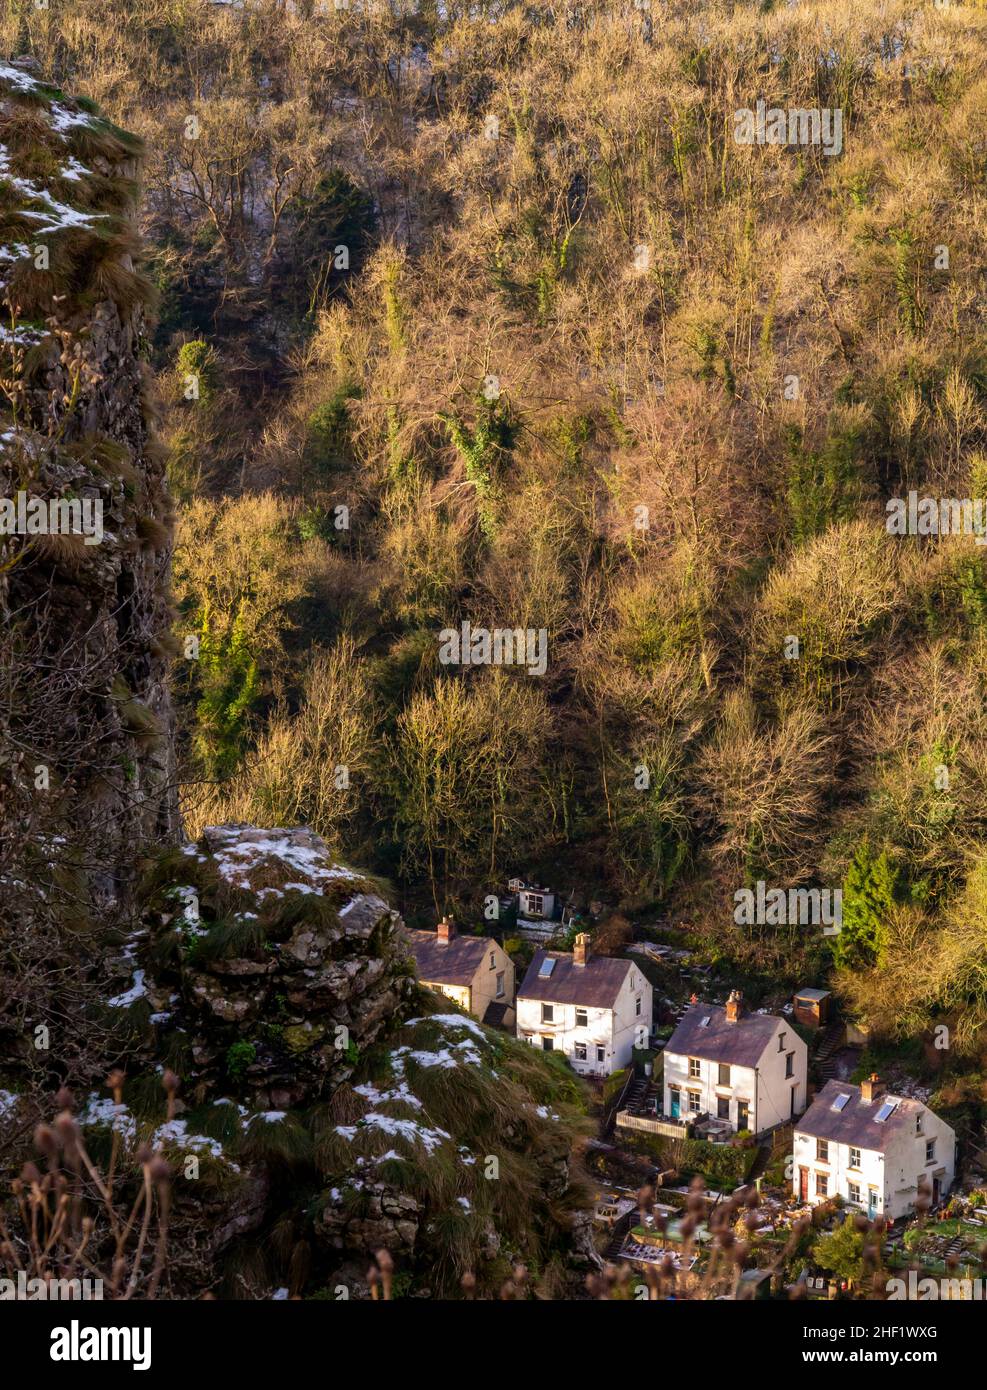 Snow covered landscape with trees at High Tor in Matlock Bath in the Derbyshire Peak District England UK with houses visible in the distance below. Stock Photo